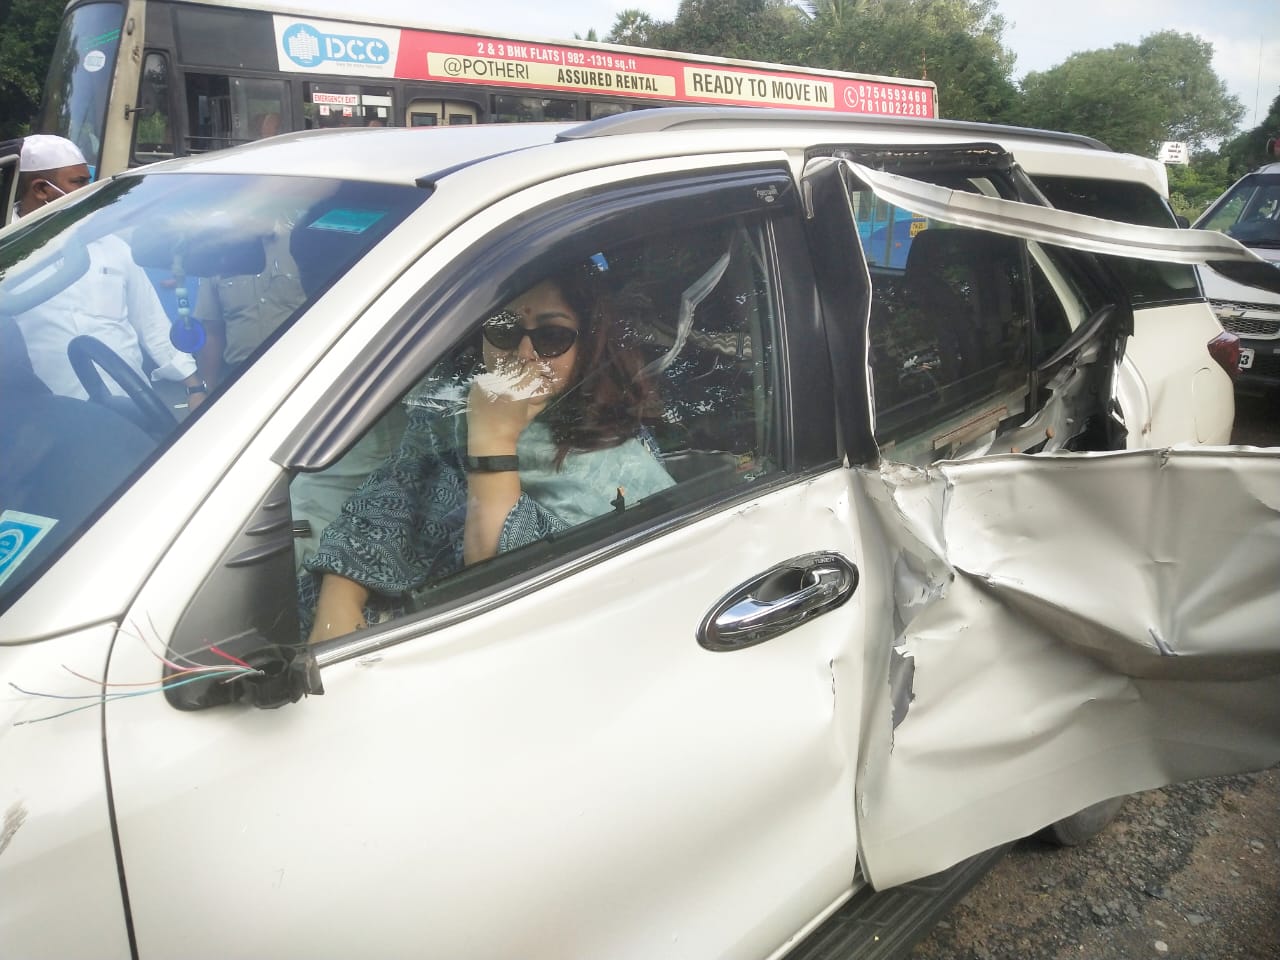 Close shave for BJP's Khushbu as tanker rams into her car